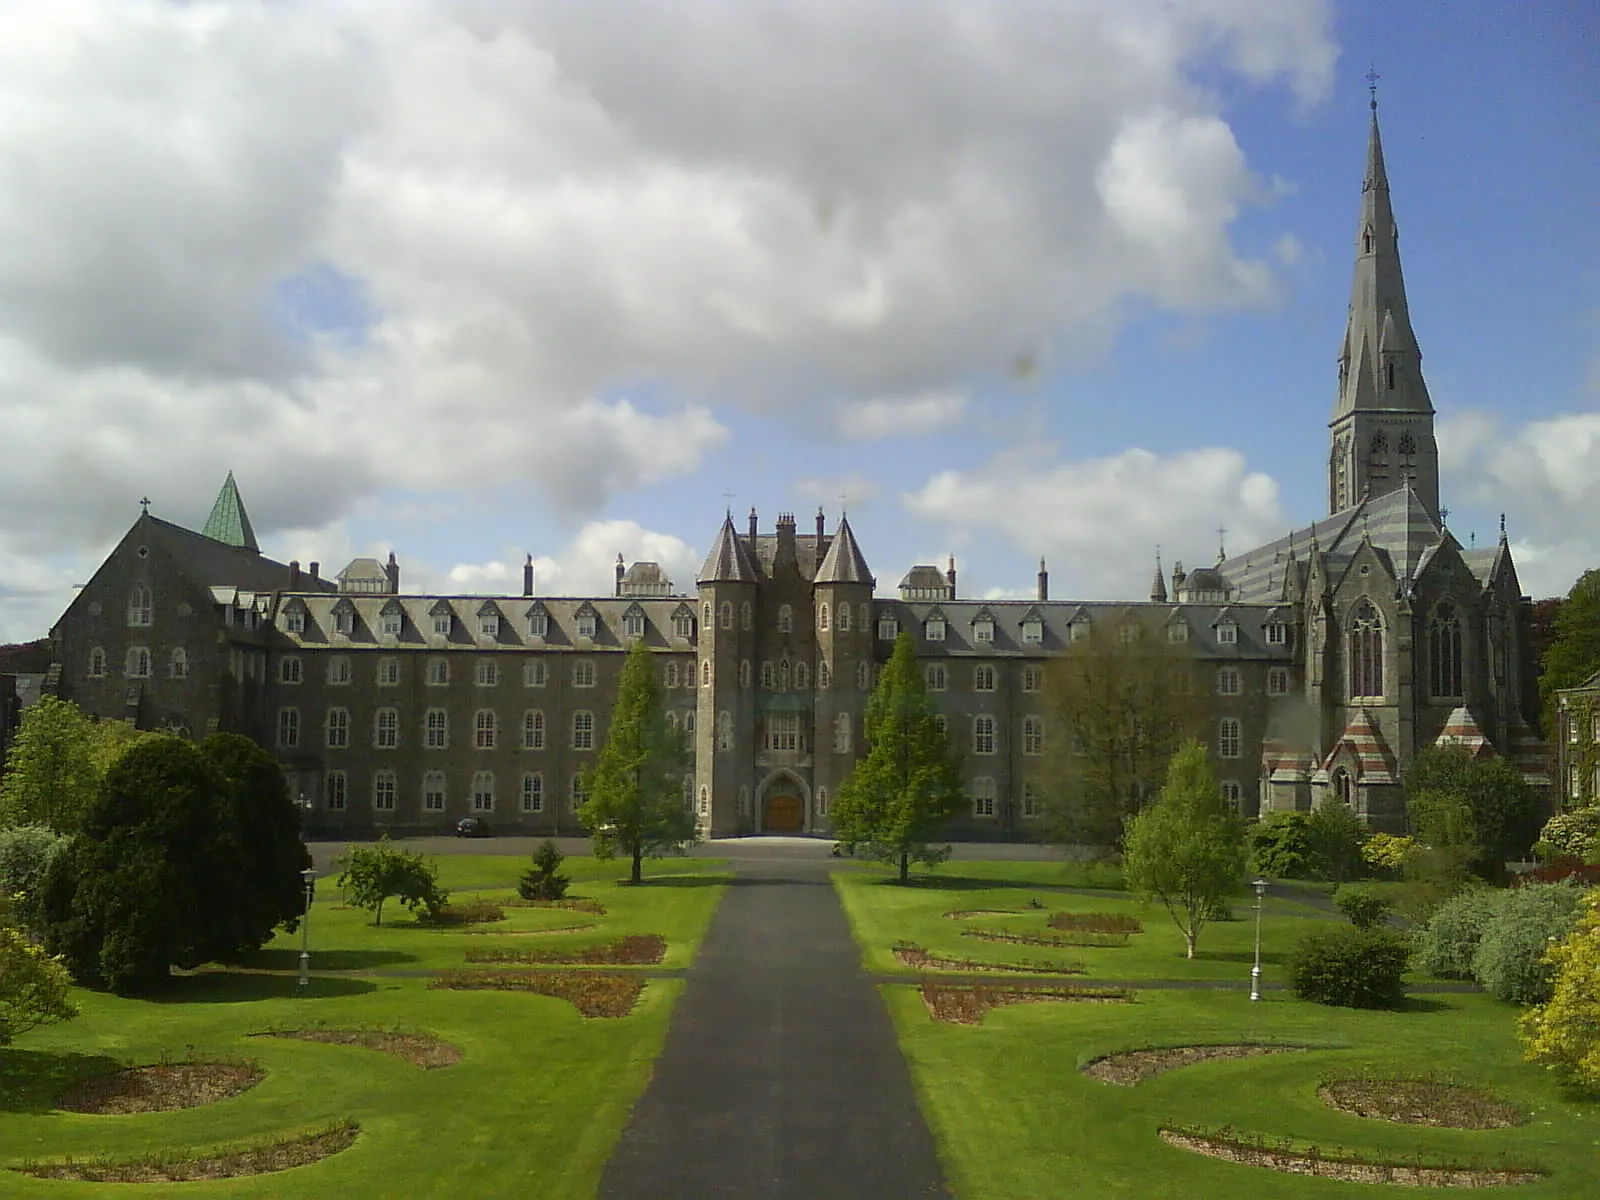 Image of Maynooth